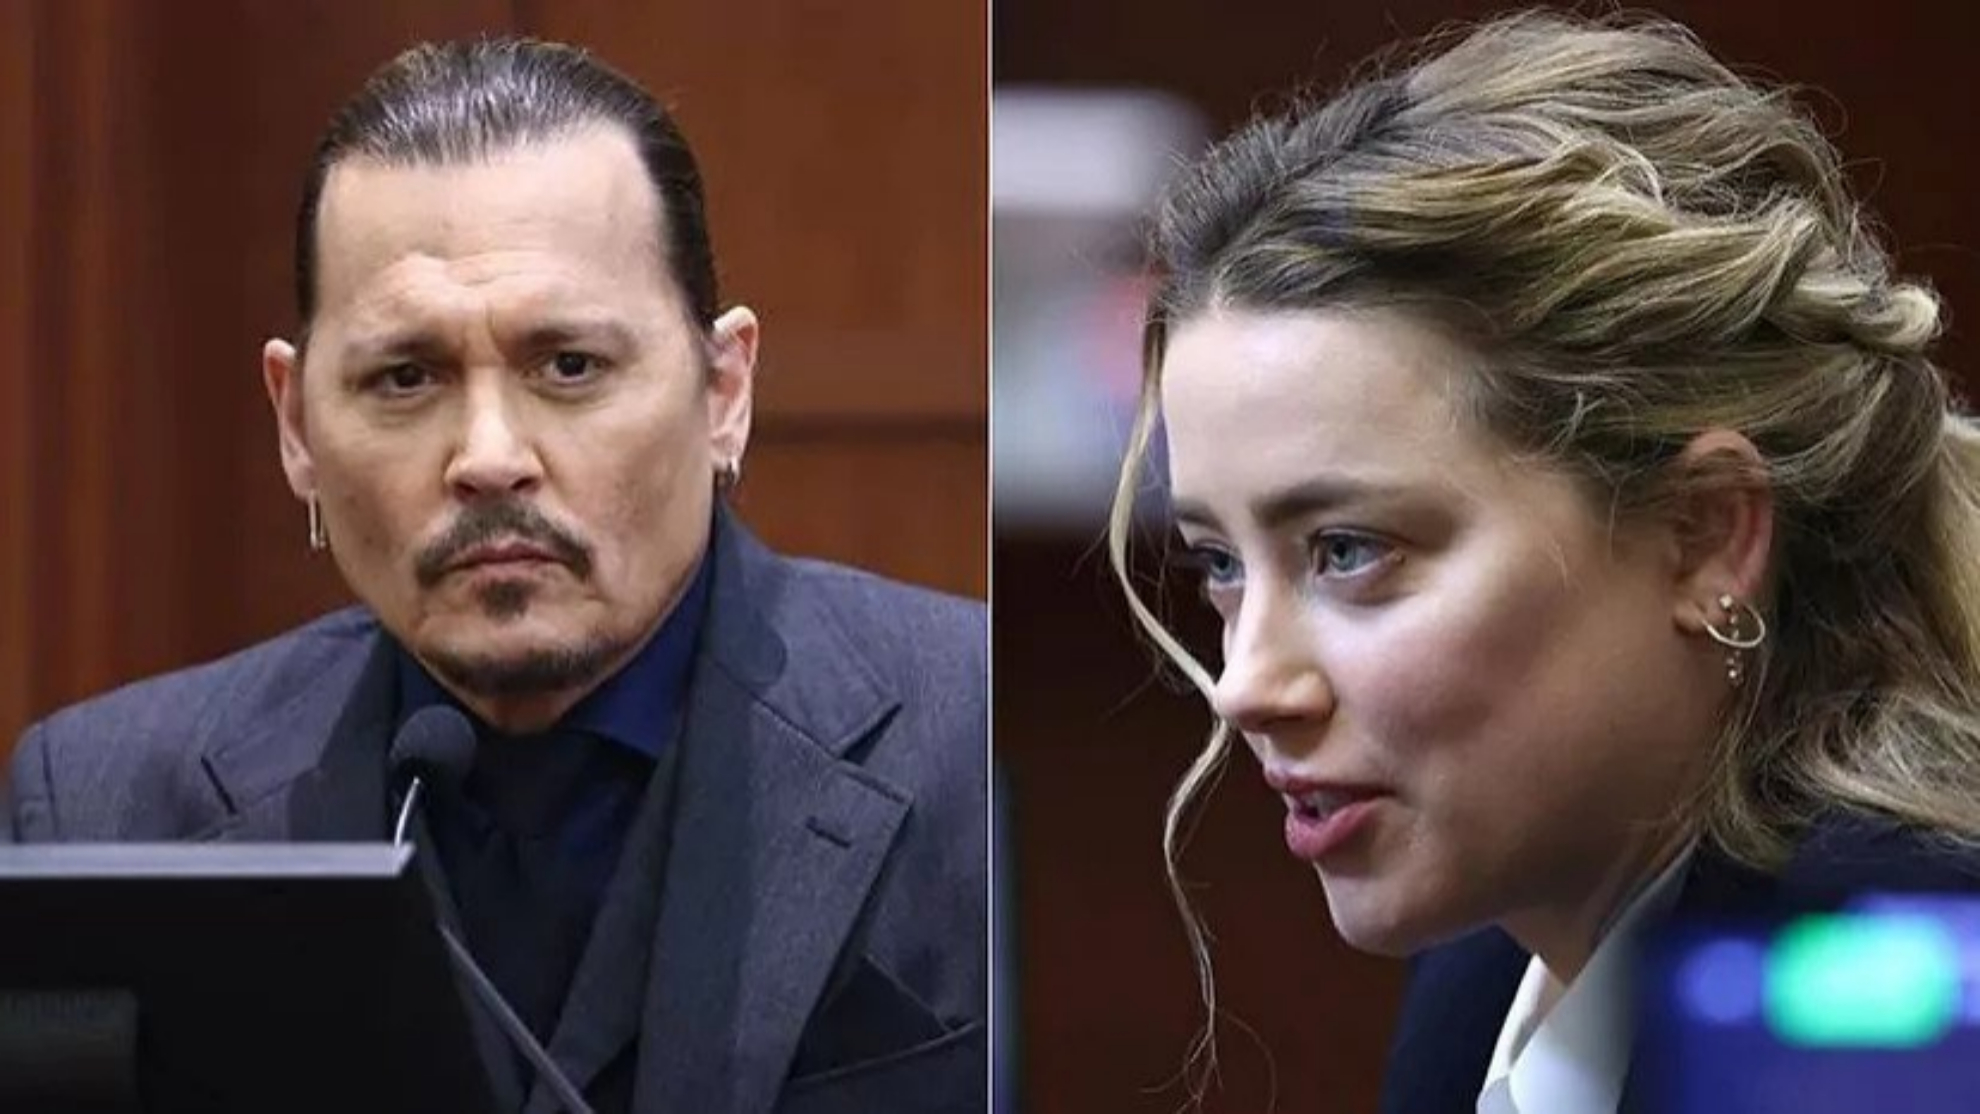 Johnny Depp and Amber Heard trial - Hot Take: The Depp/Heard Trial film set to release on September 30